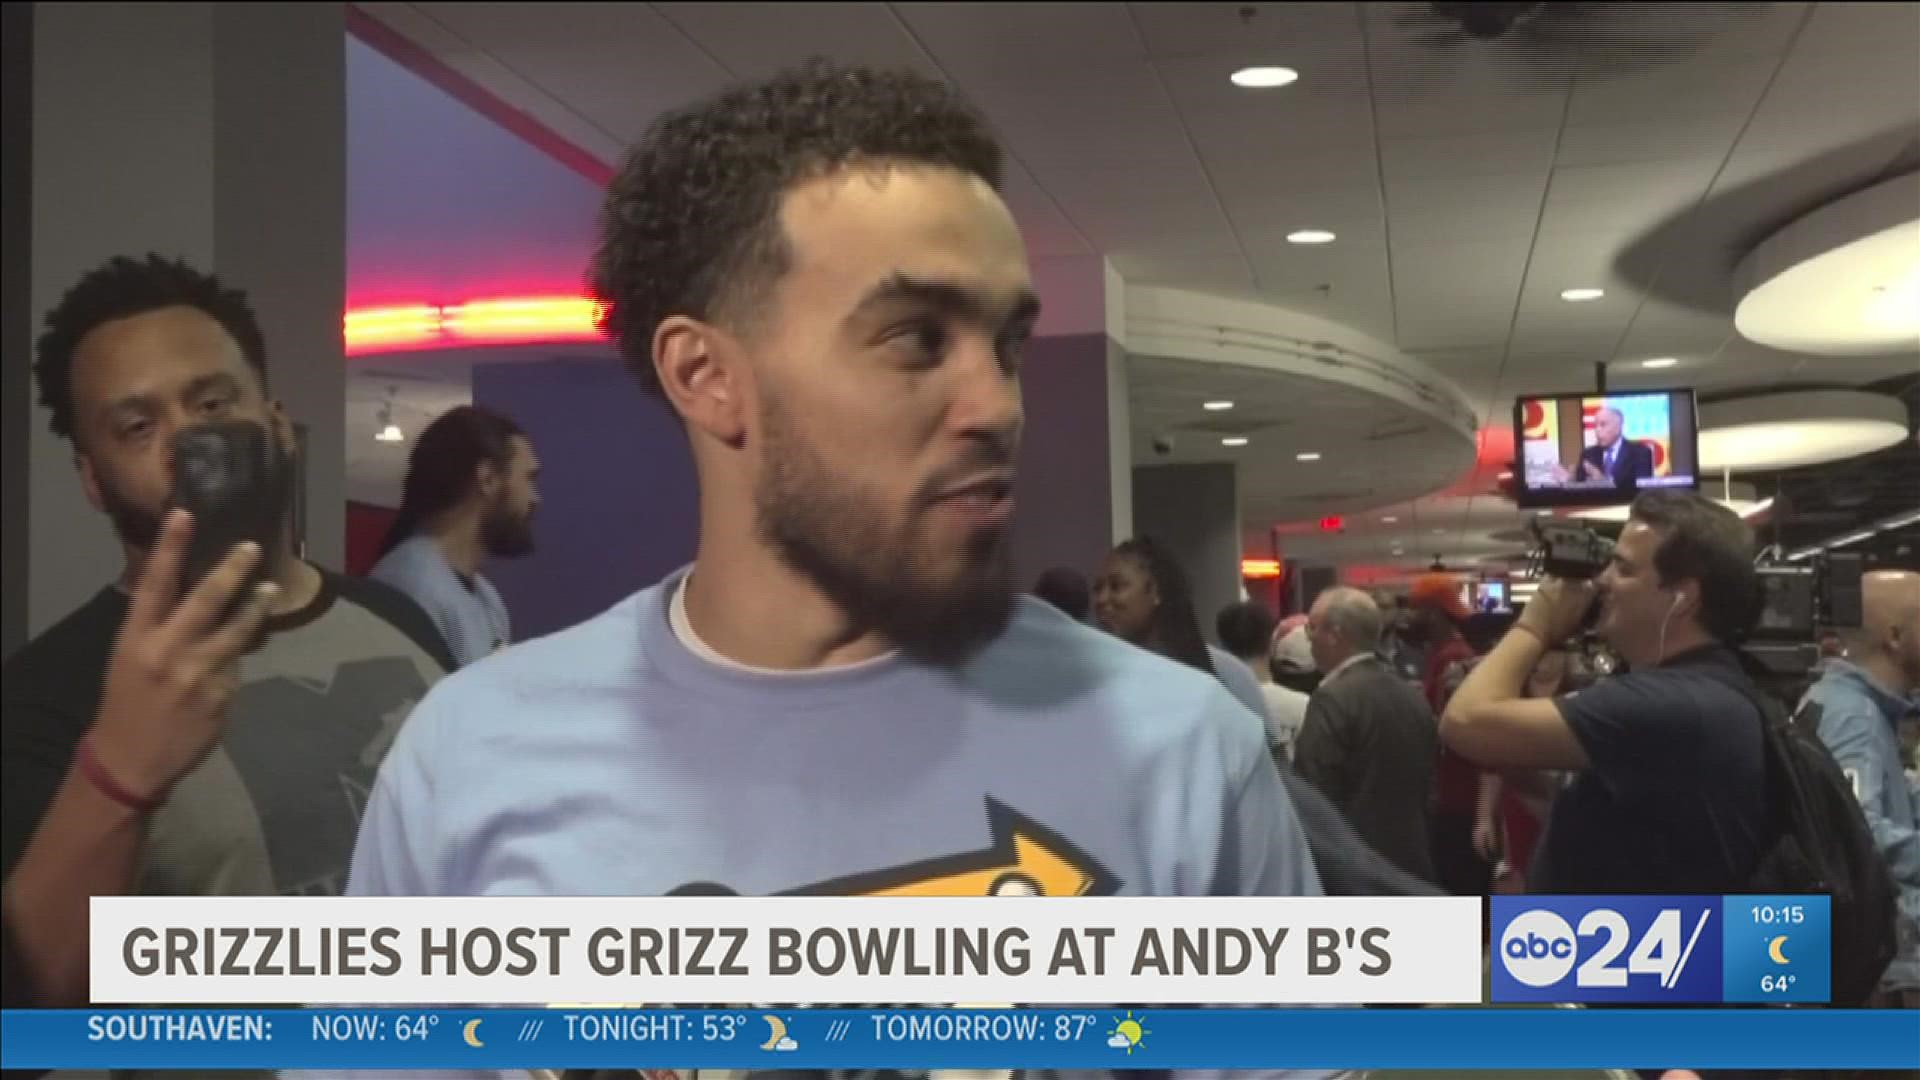 The Memphis Grizzlies bowled, talked, and took pictures with Grizzlies fans that attended bowling night at Andy B's.